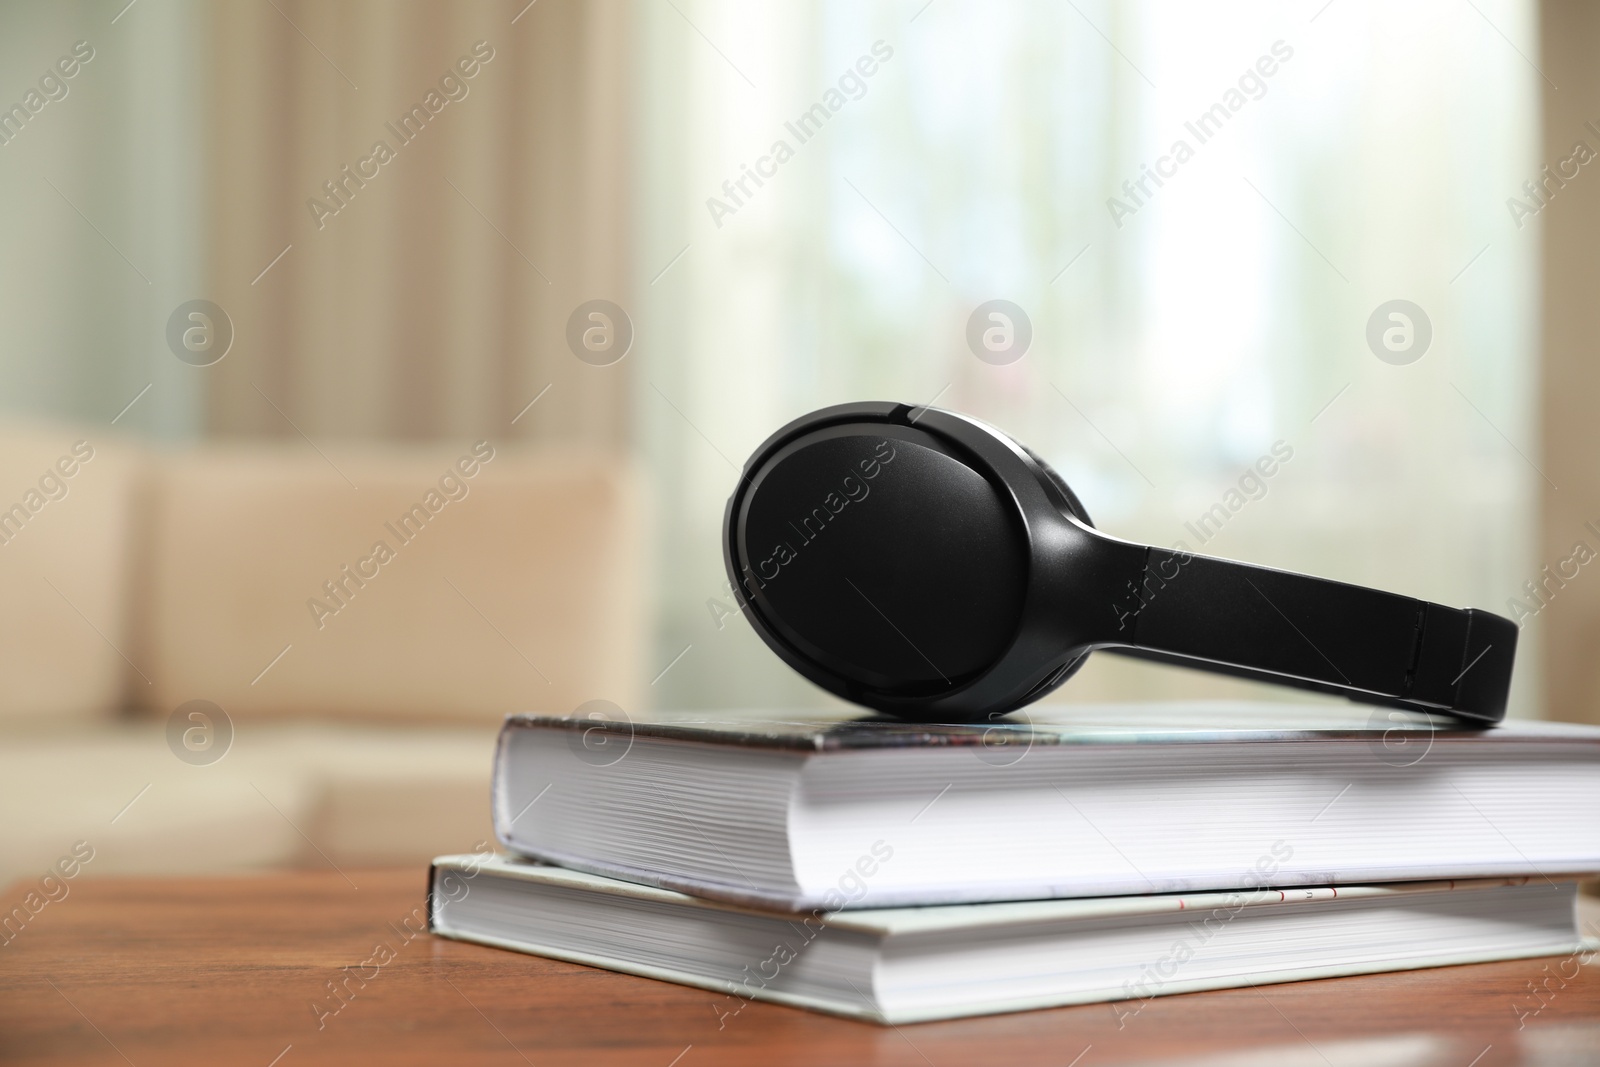 Photo of Modern wireless headphones and books on wooden table indoors